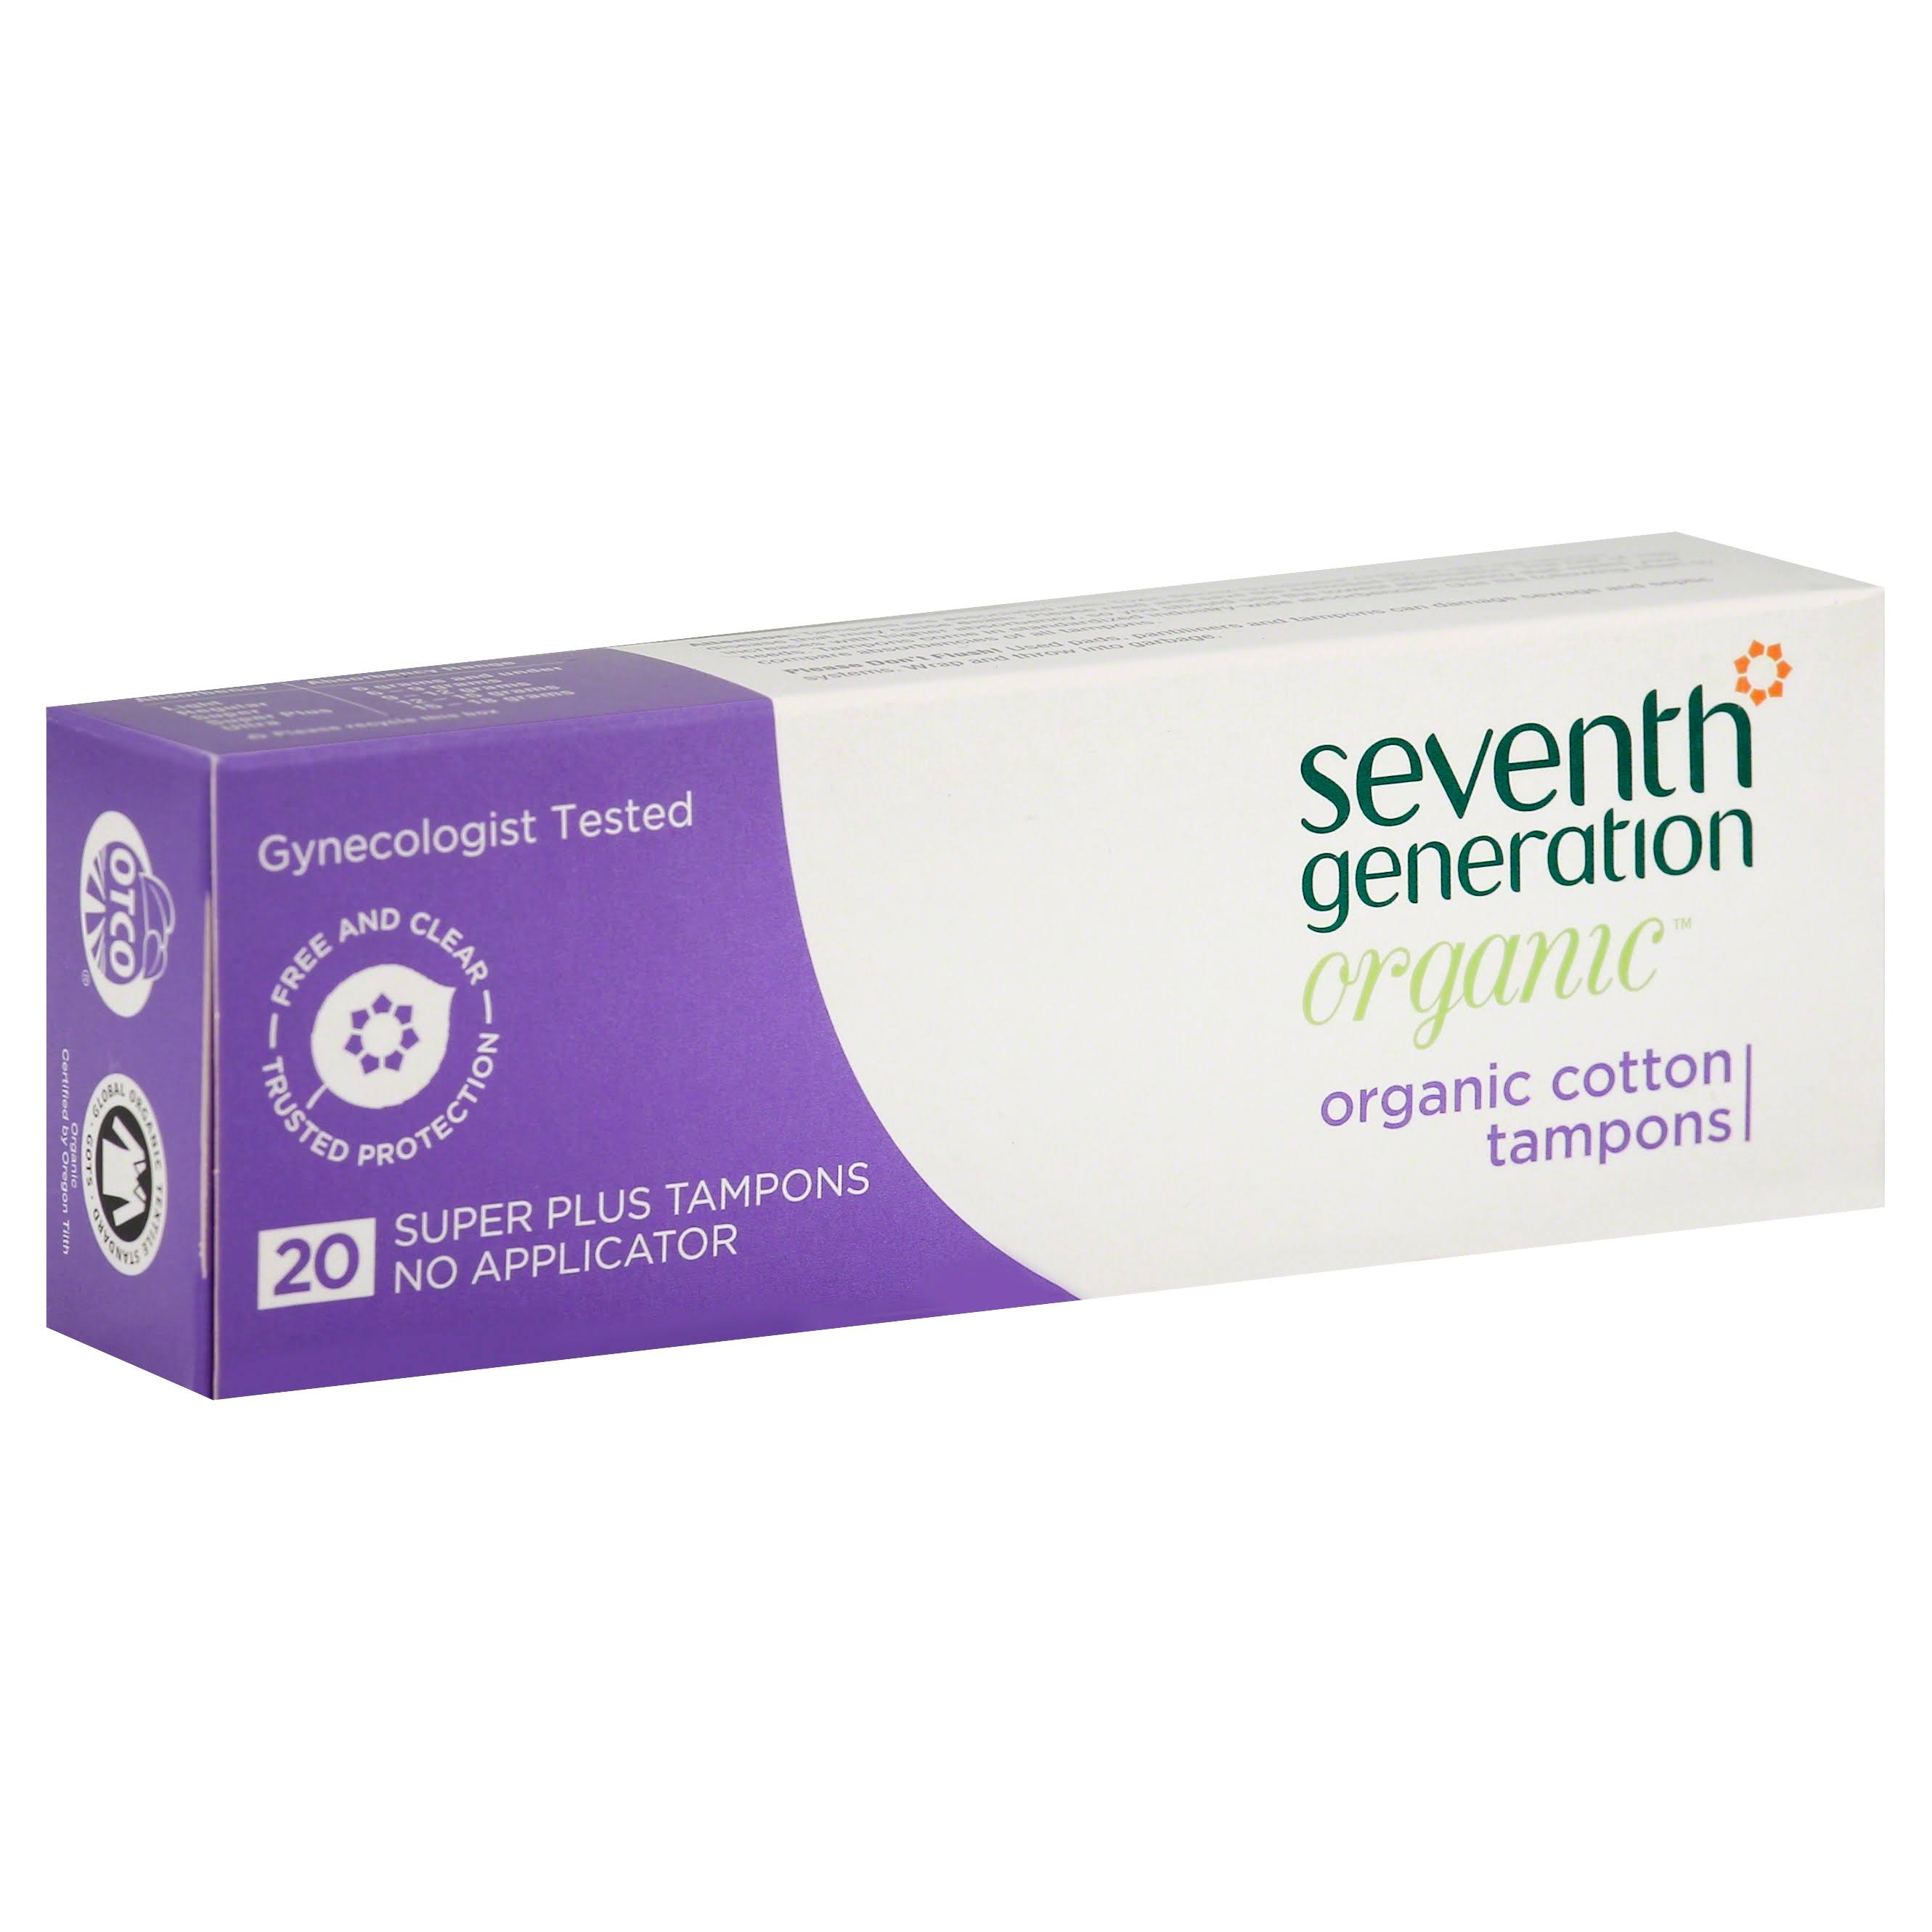 Seventh Generation Organic Cotton Tampons - 20 Pack